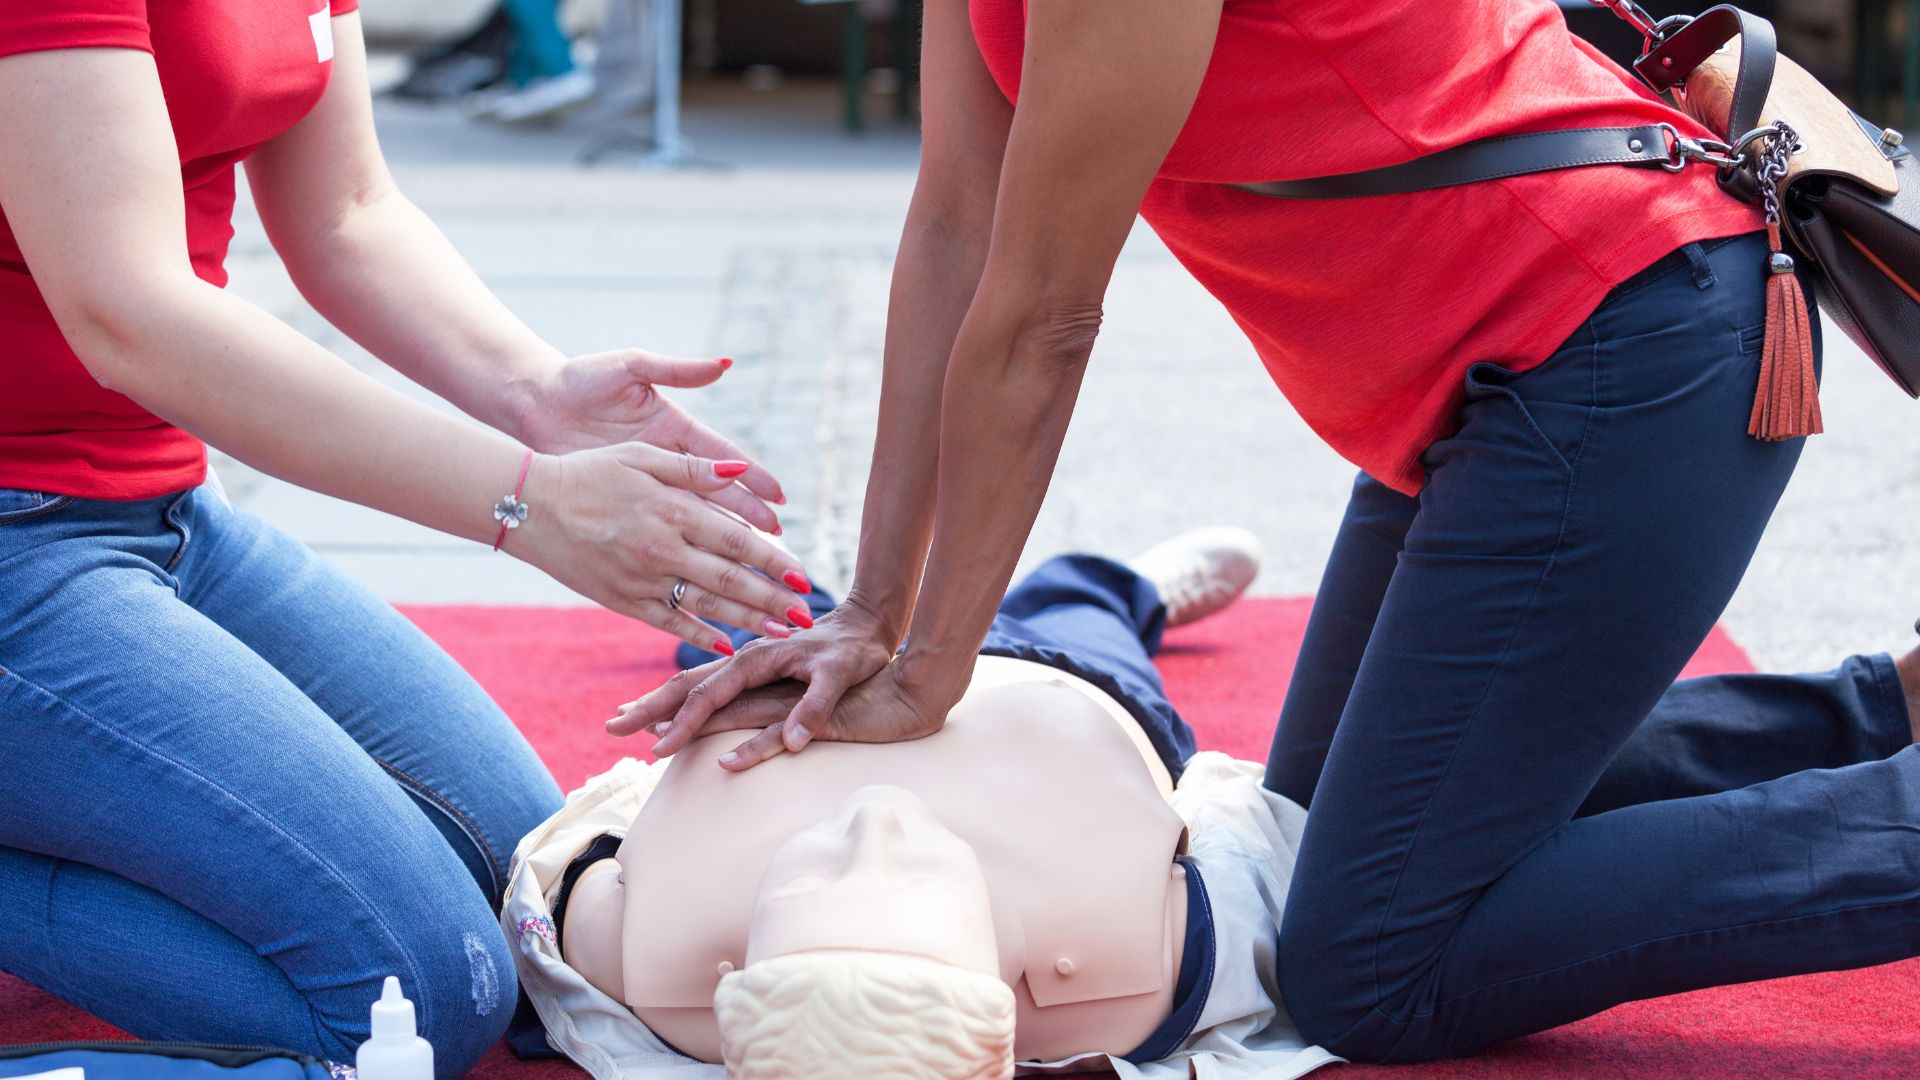 An image of a student learning how to perform CPR with an instructor offering guidance.